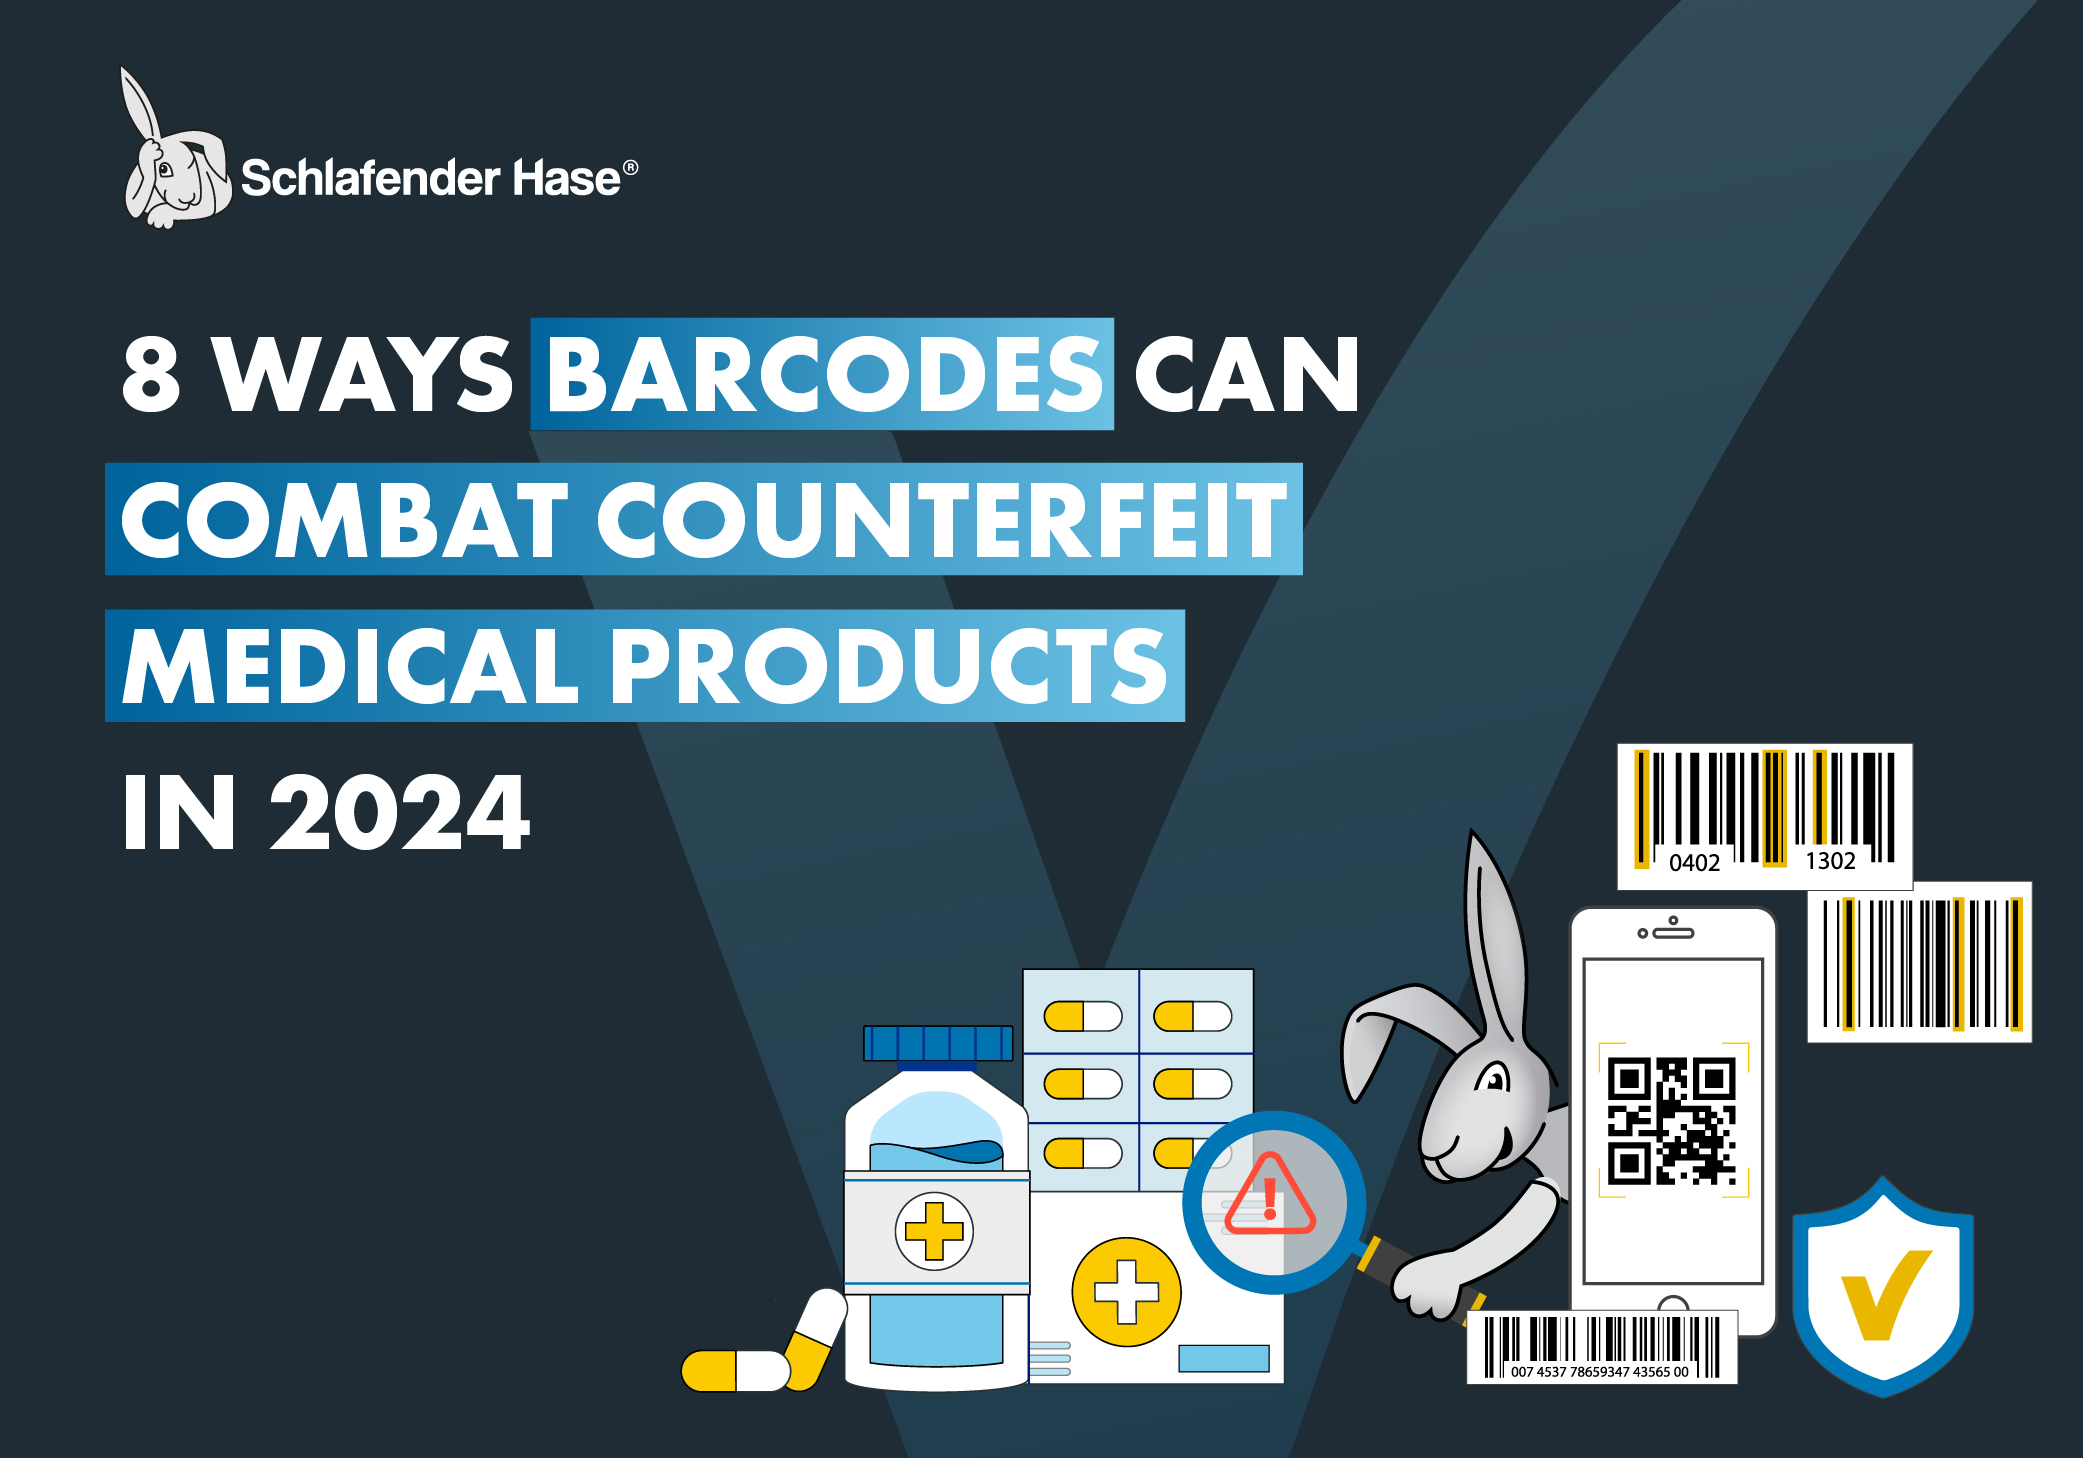 Barcodes can combat counterfeit medical products